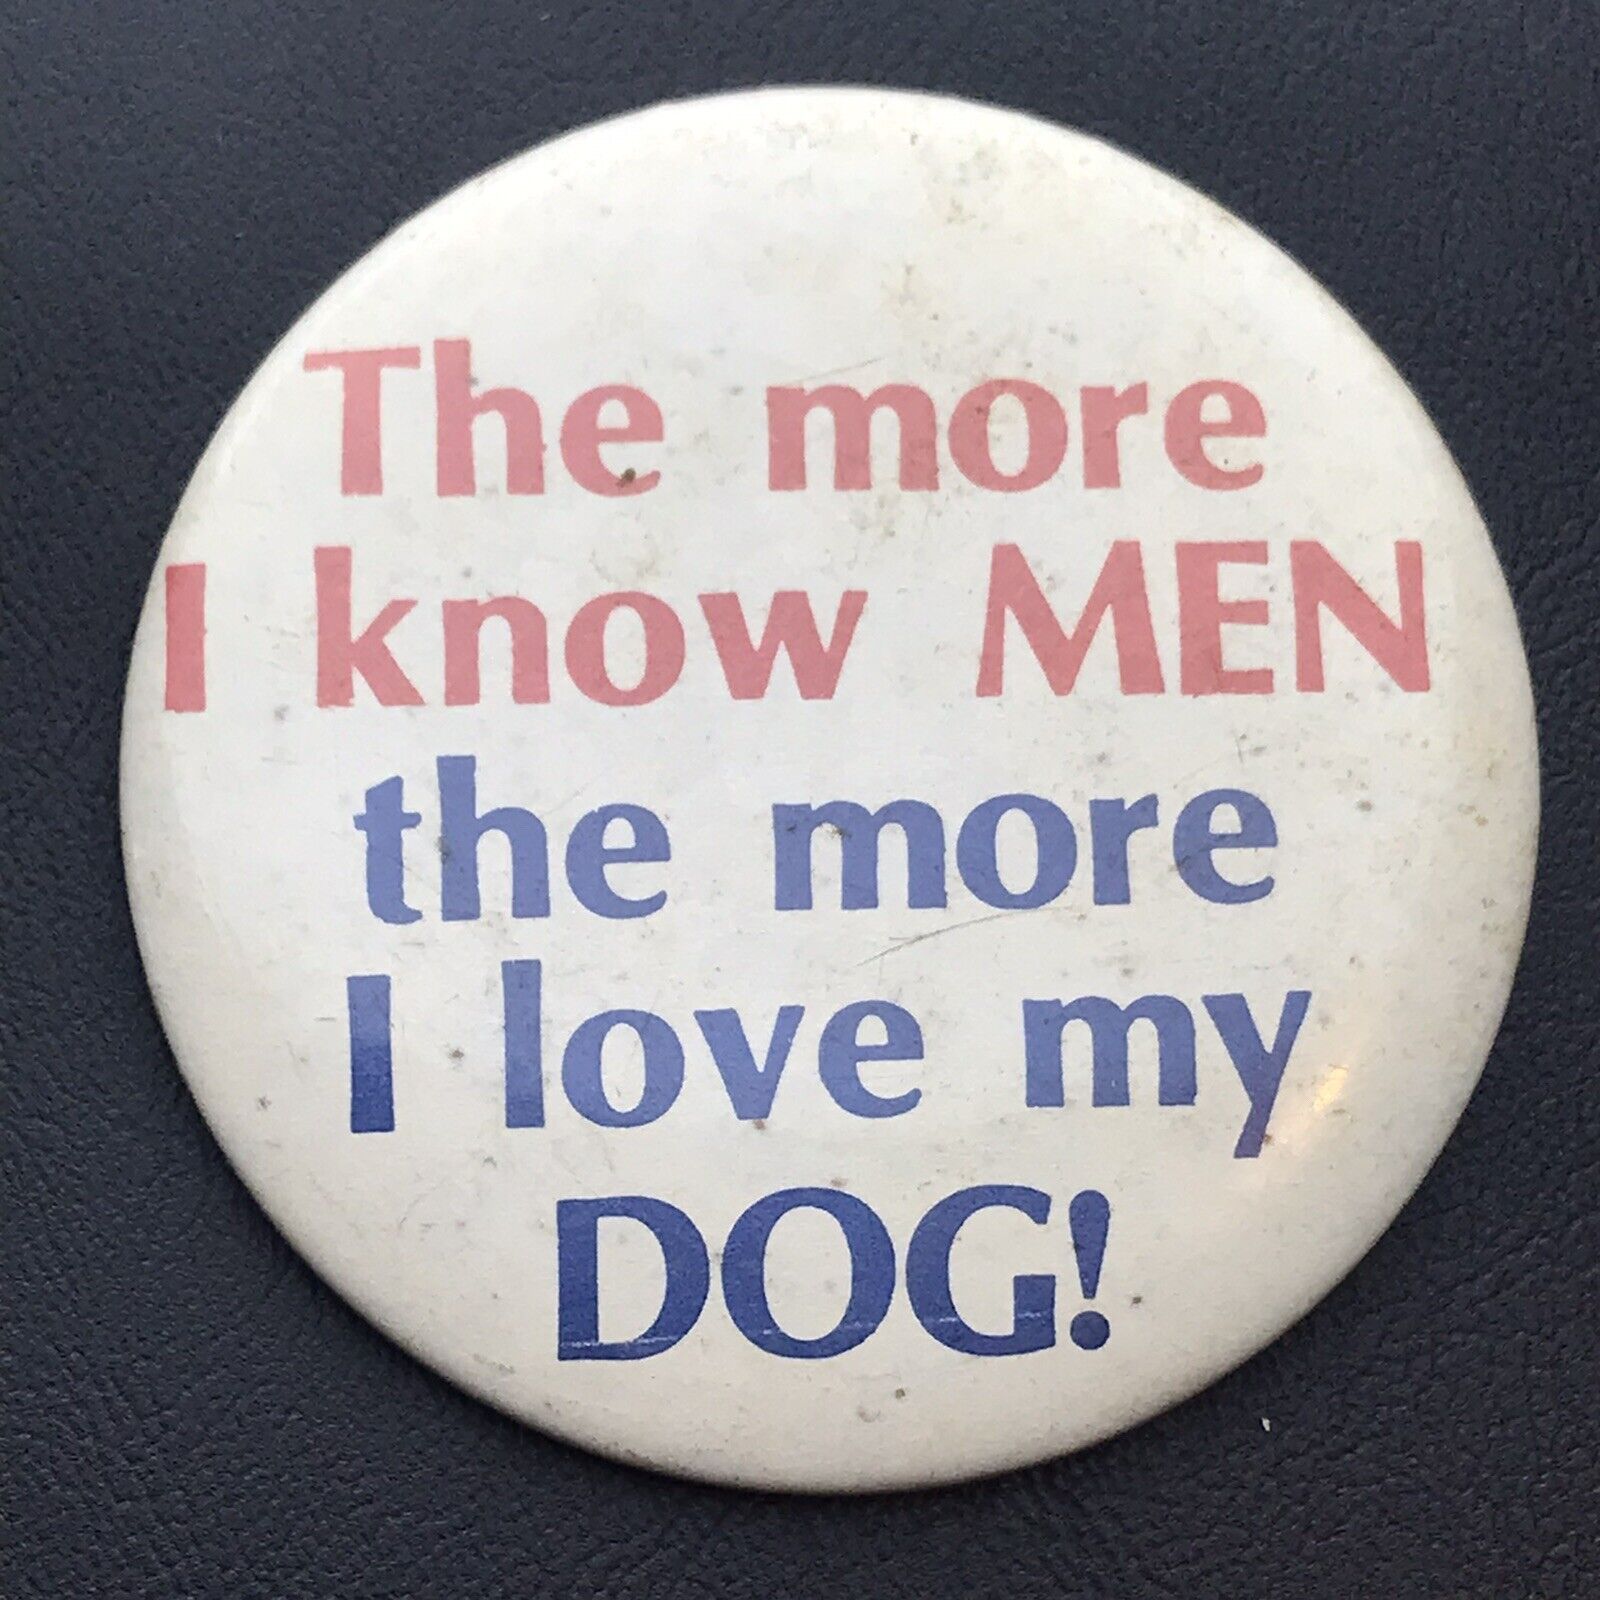 The More I Know Men The More I Love My Dog Vintage Pin Button Pinback